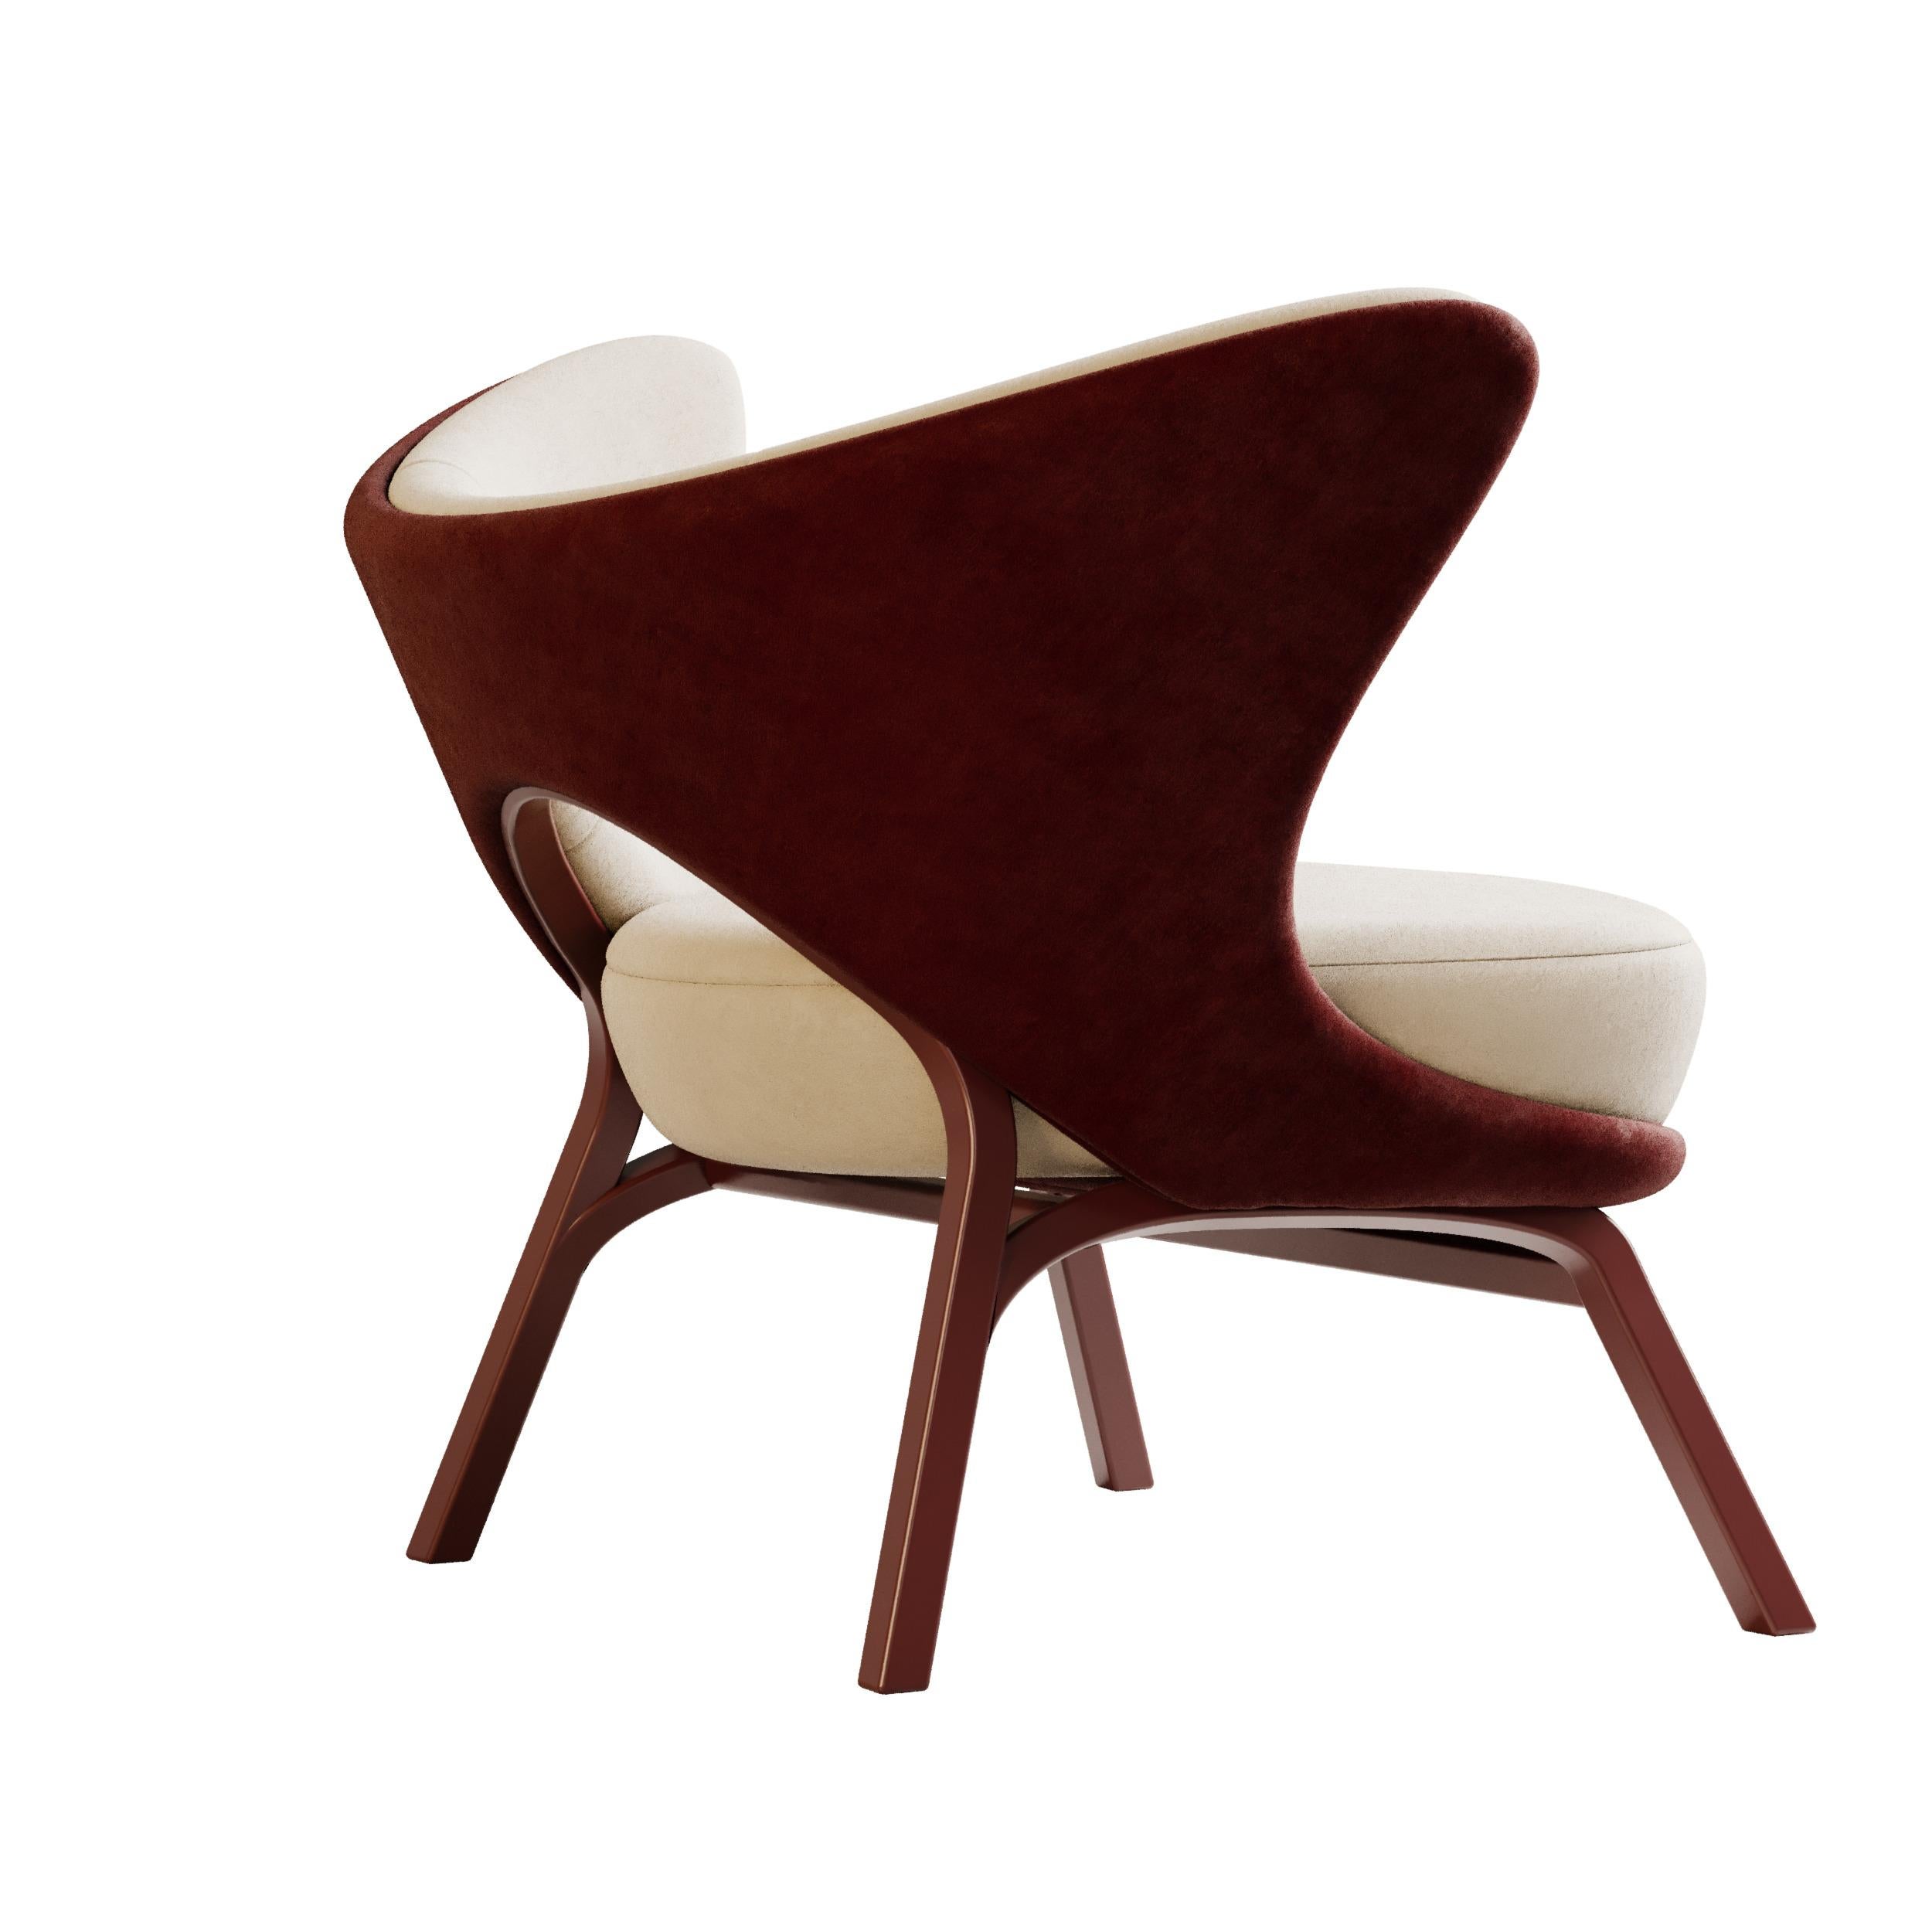 Portuguese Wonatti Kotor Armchair, Lacquered Wood Armchair, Red Suede Armchair For Sale